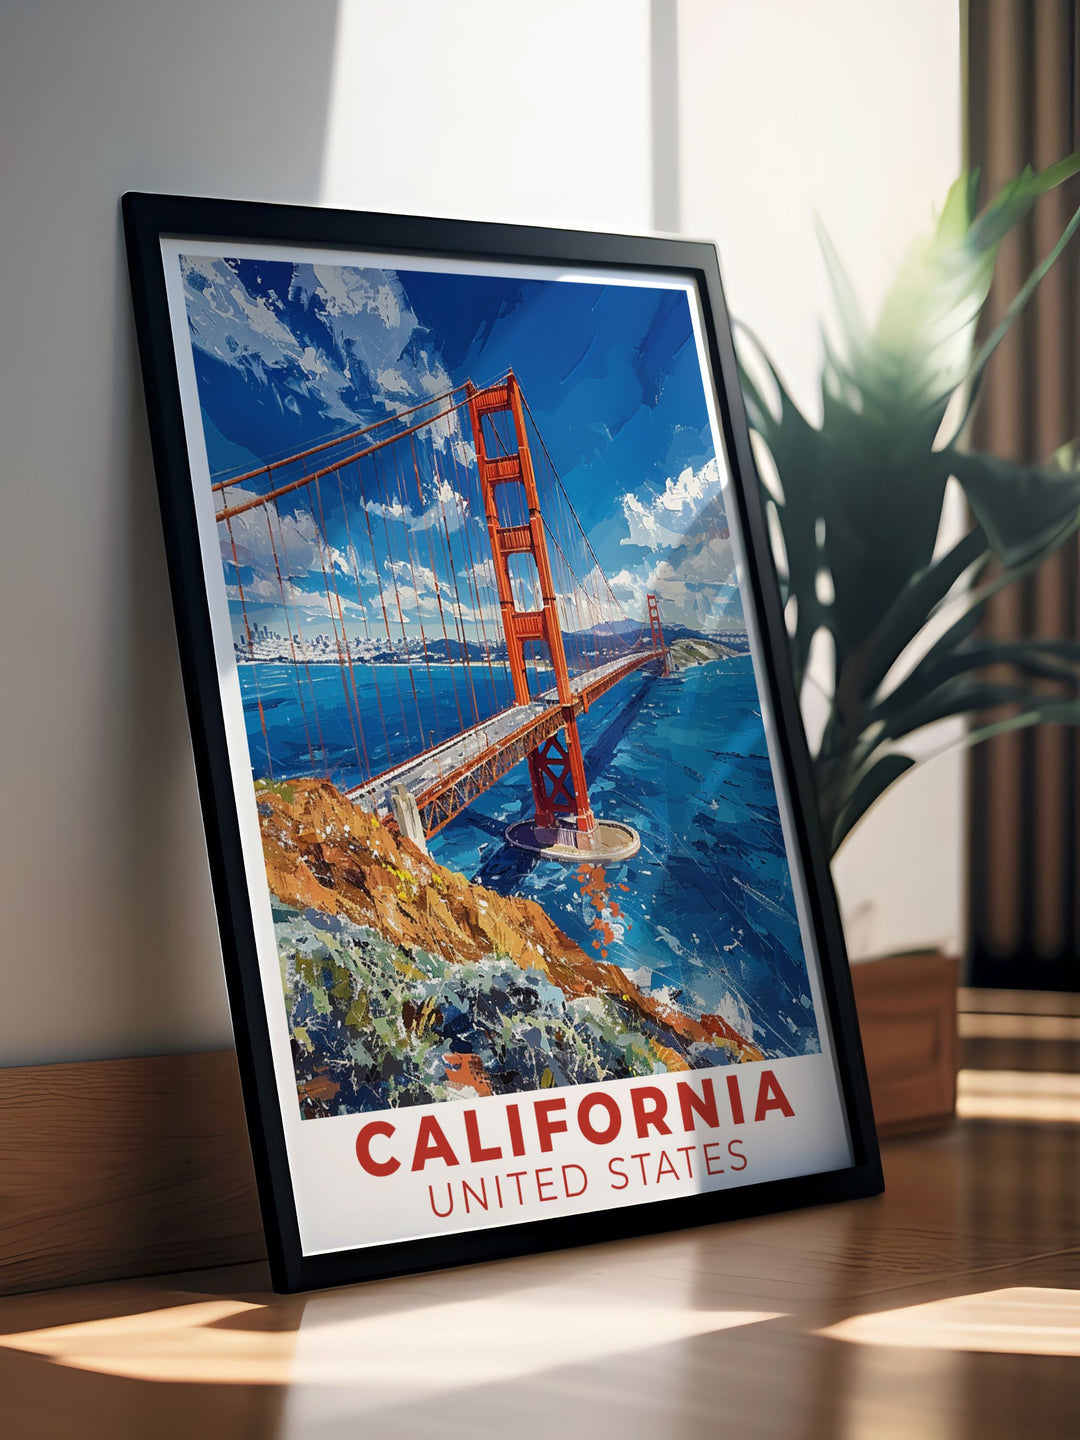 California travel print featuring the Golden Gate Bridge a timeless piece of wall art that brings the majestic view of San Franciscos famous landmark into your home perfect for travelers and art lovers seeking unique decor